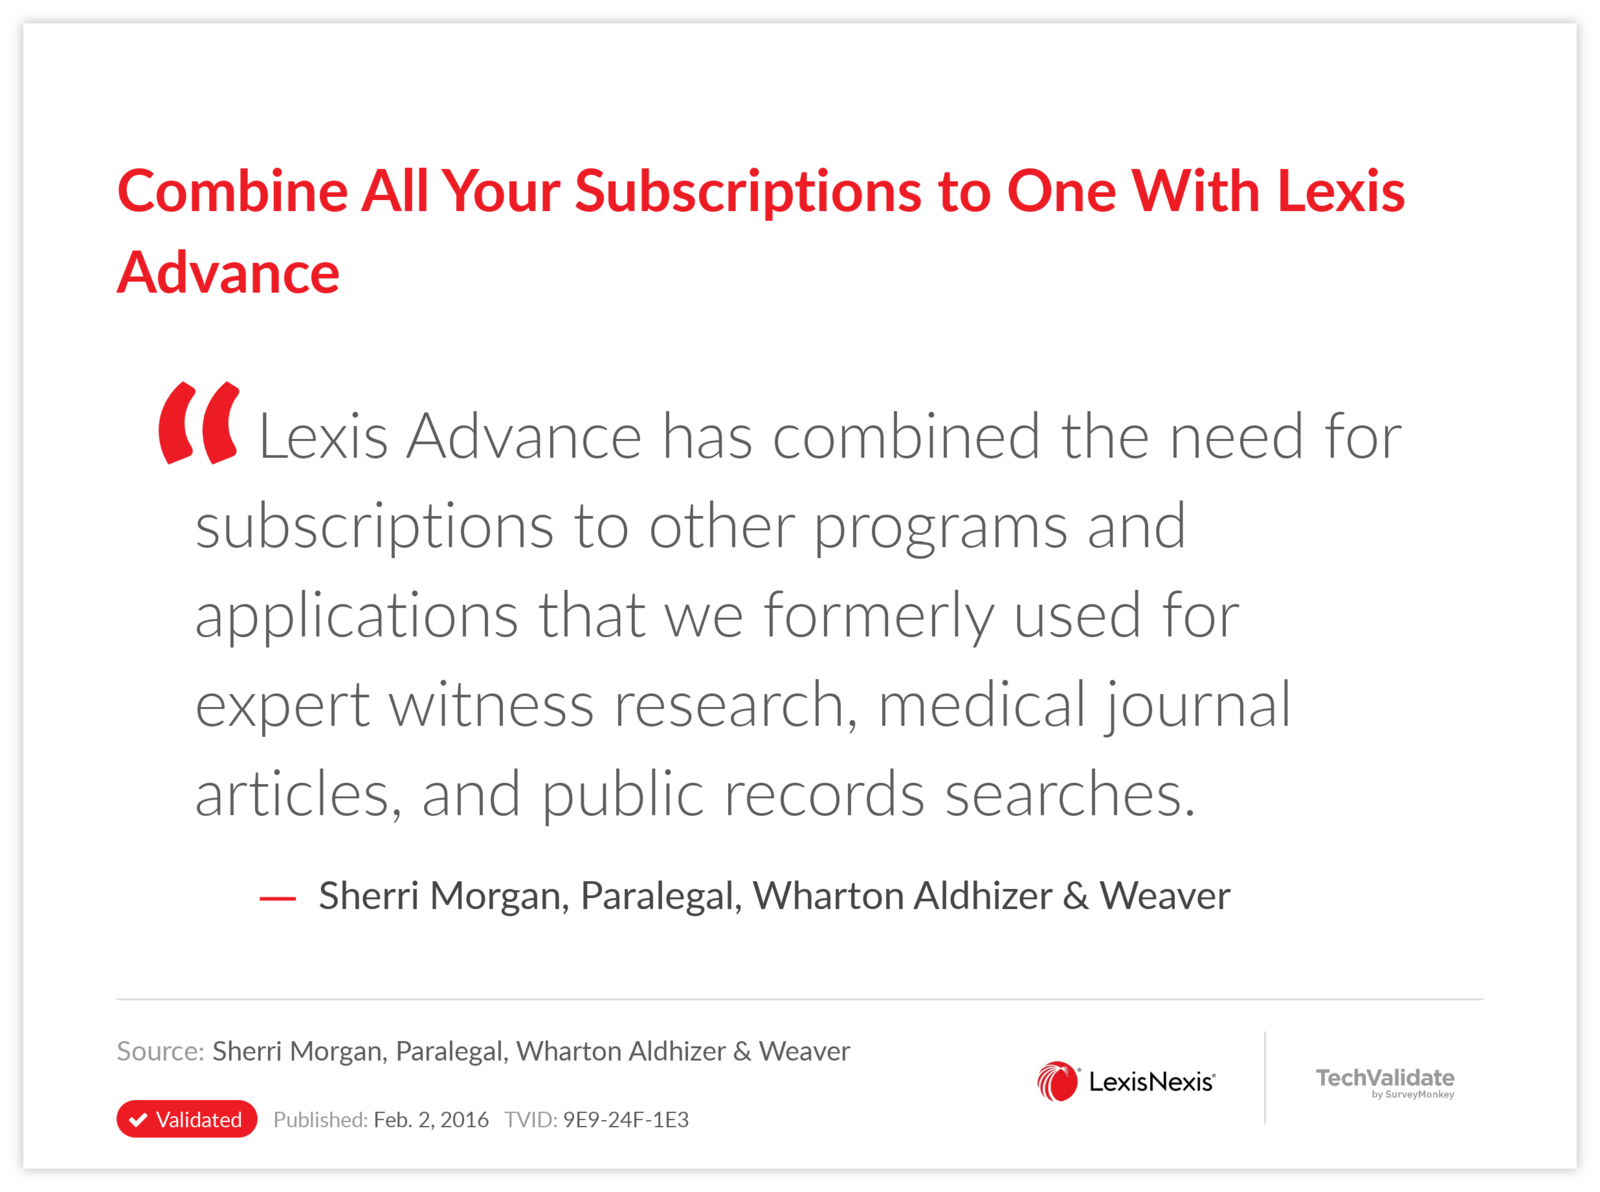 Combine All Your Subscriptions to One With Lexis Advance